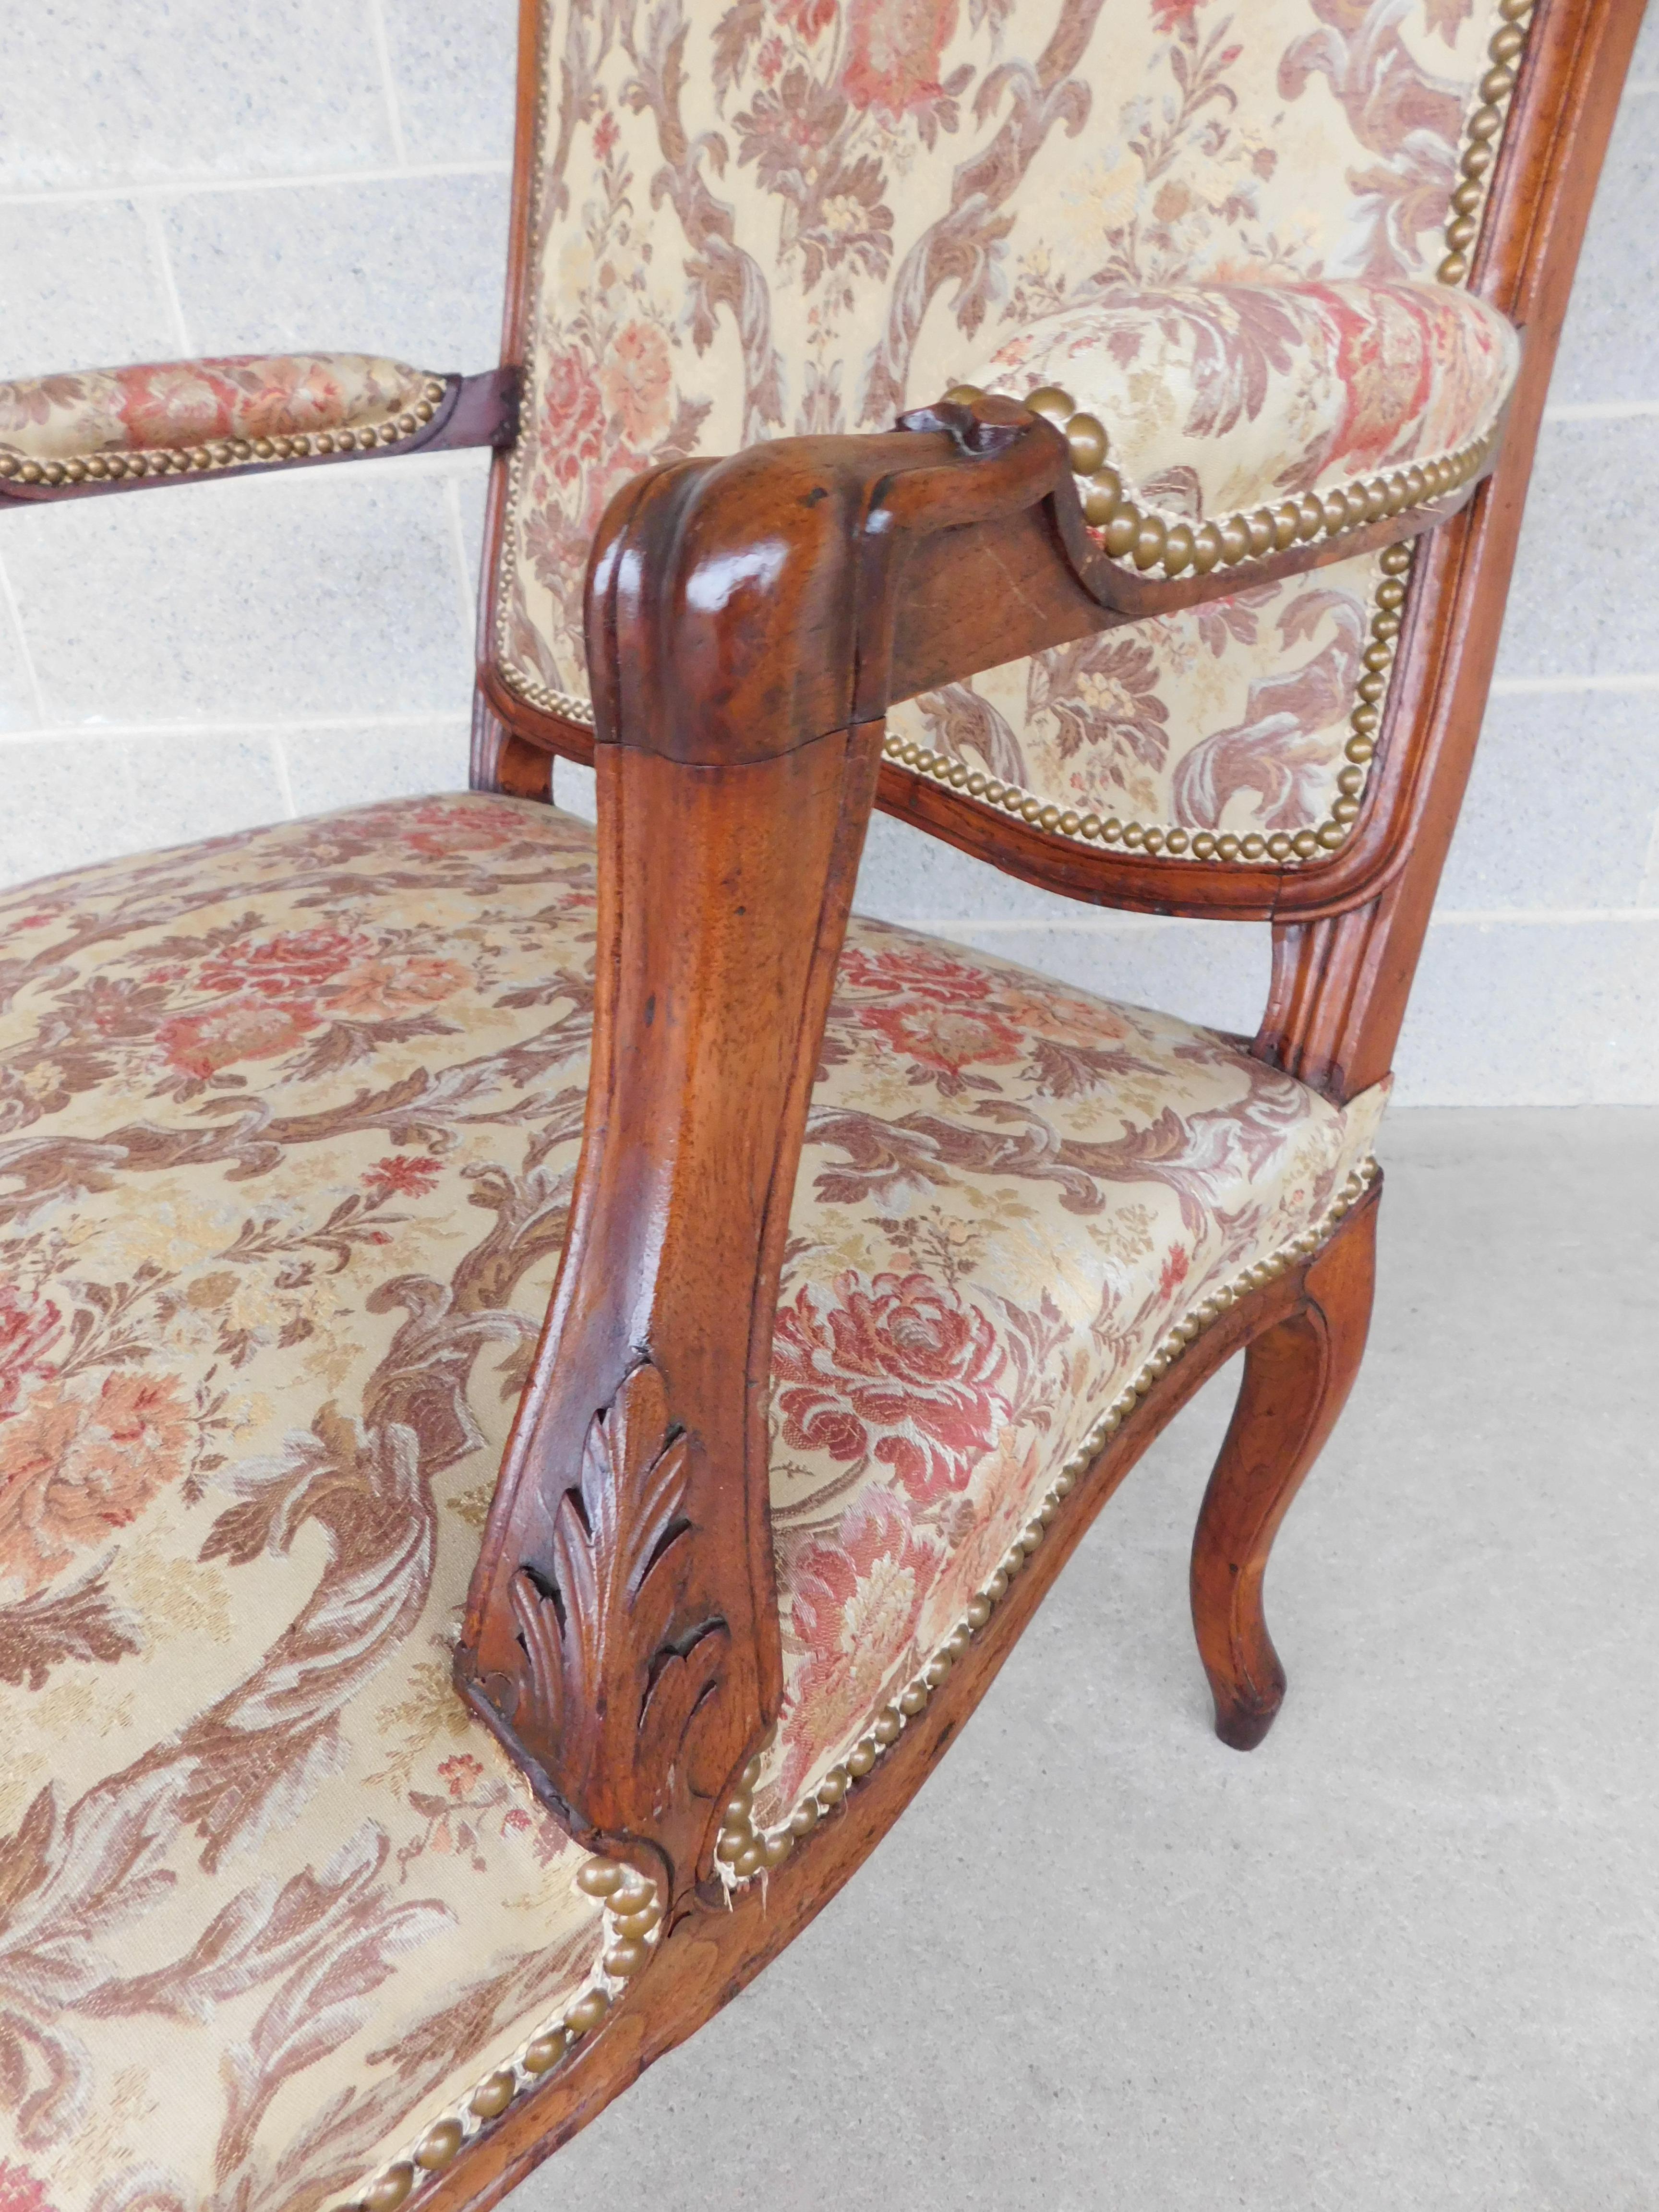 20th Century Vintage French Louis XV Style Fauteuil Chairs  - a Pair For Sale